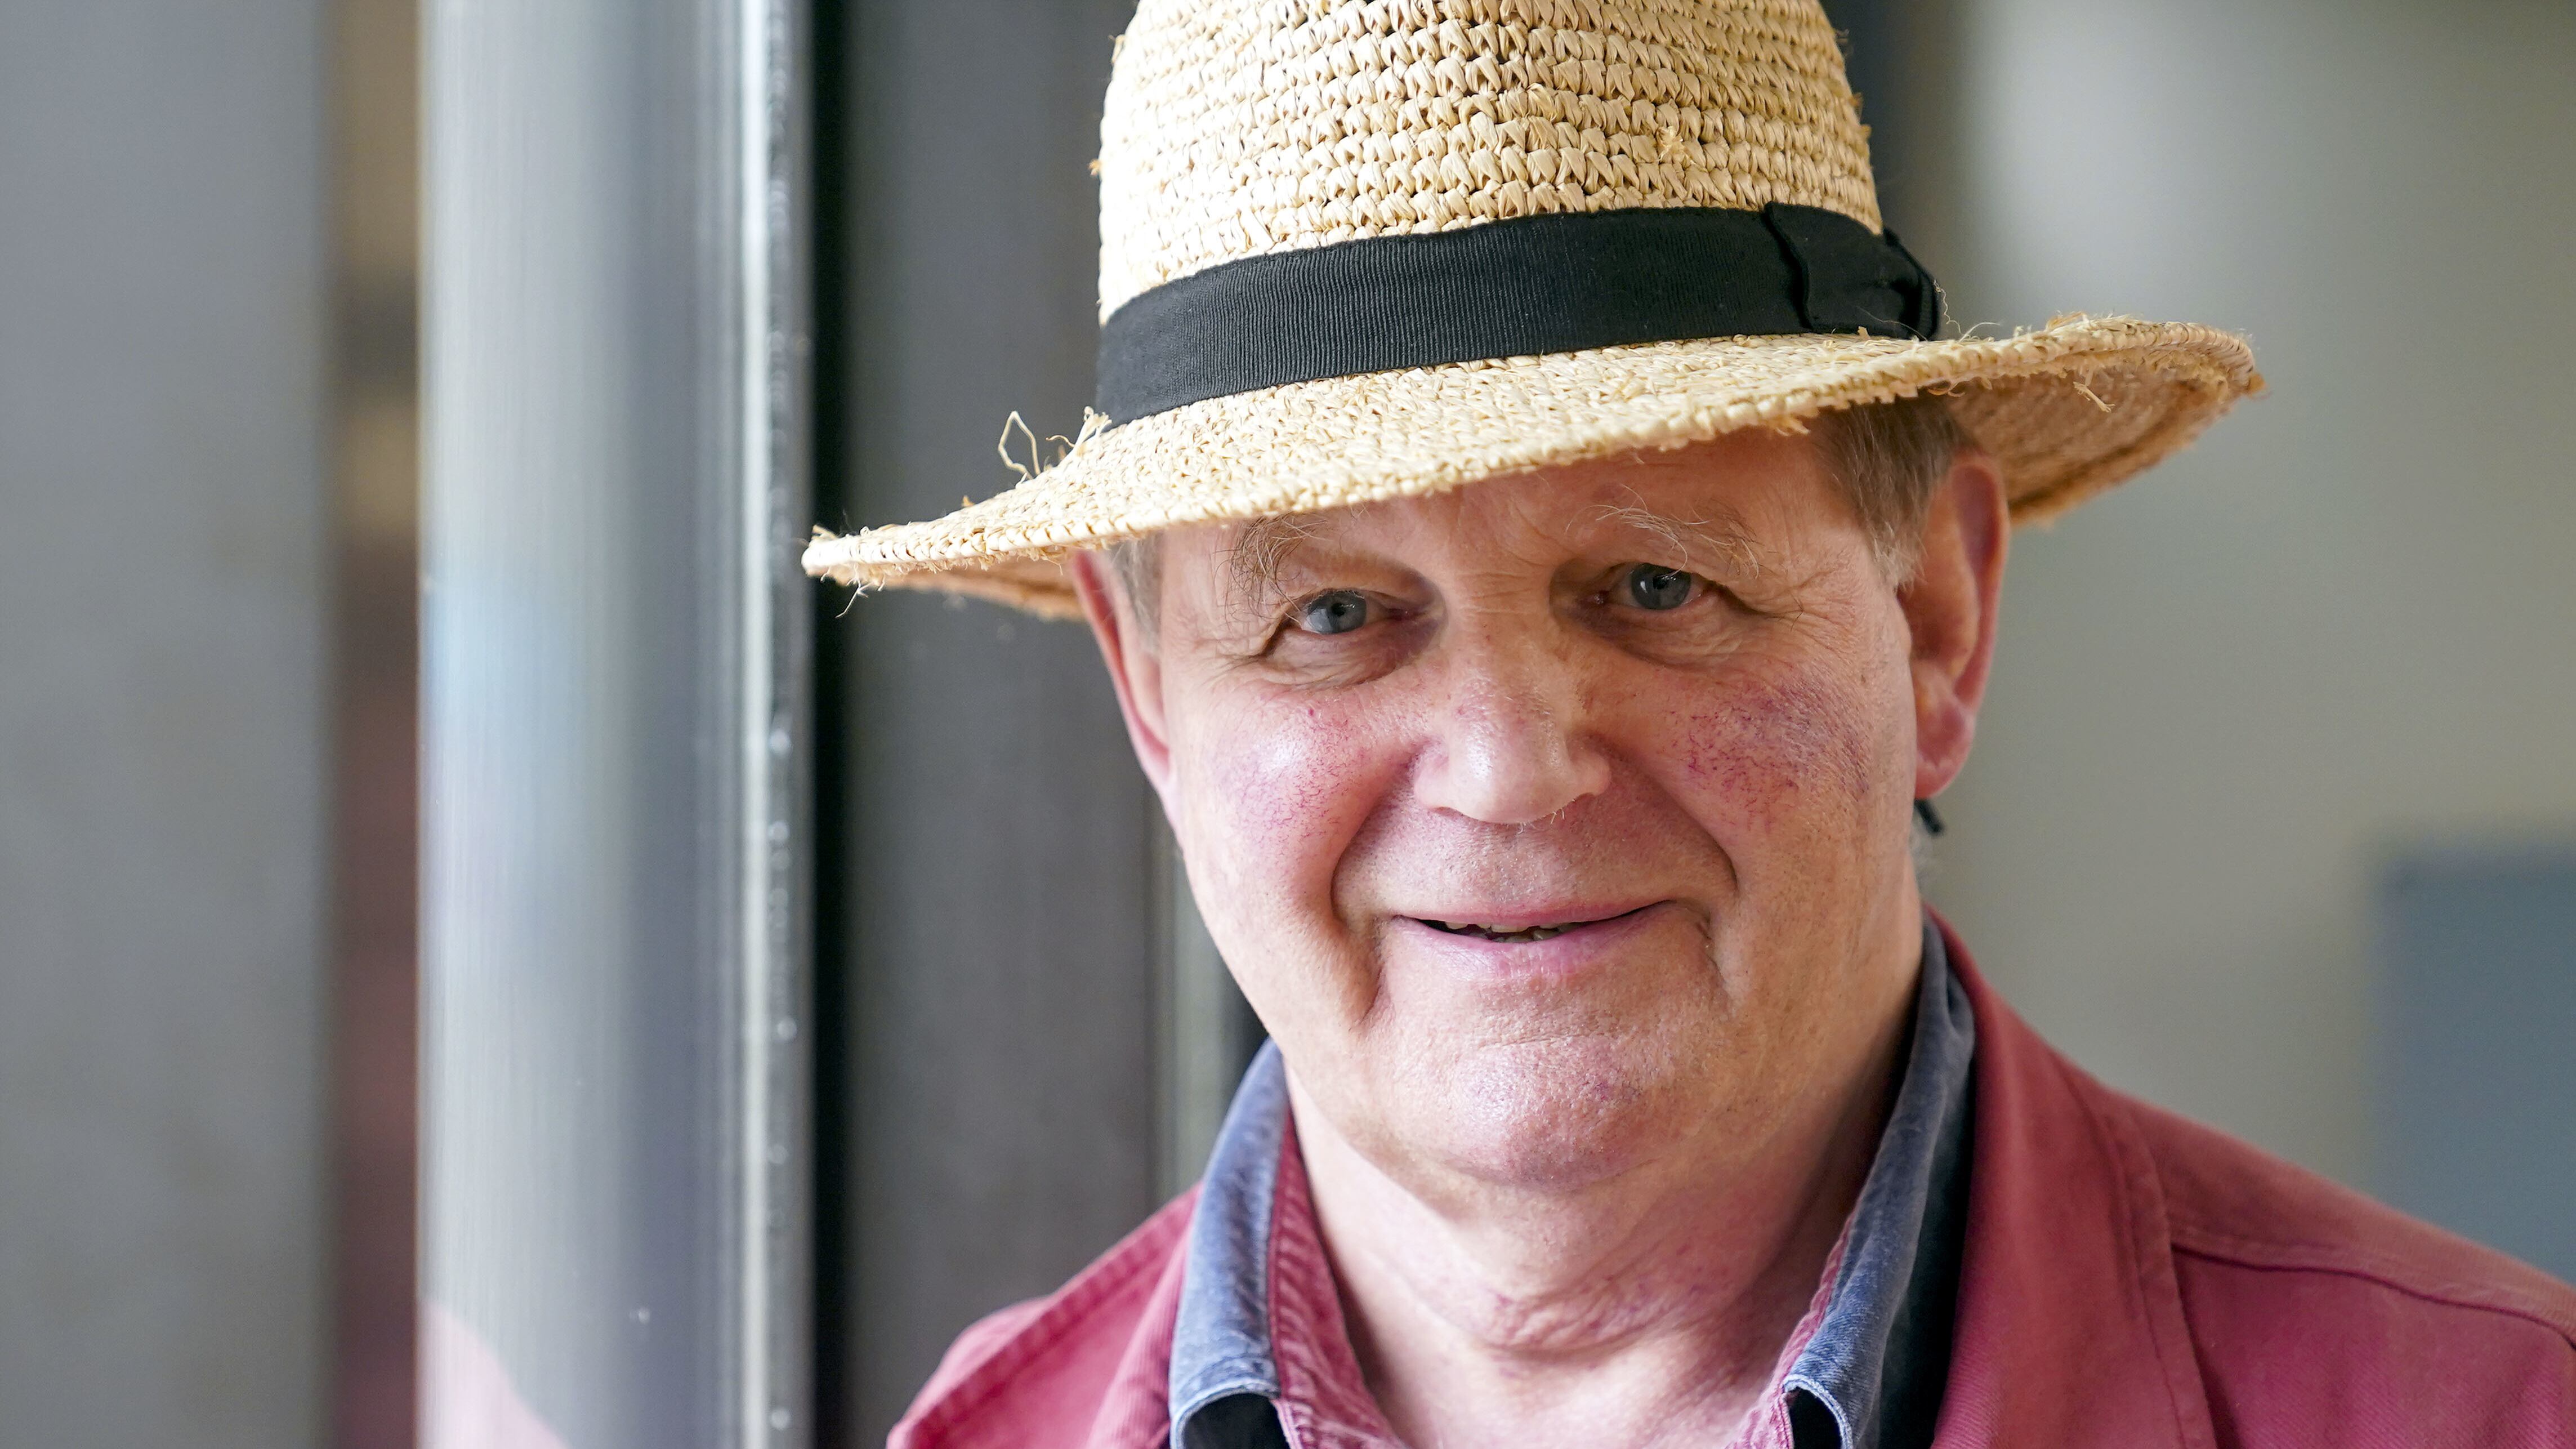 Children’s author Sir Michael Morpurgo has written to the PM and Labour leader calling for long-term national investment in supporting young people and their families to read together